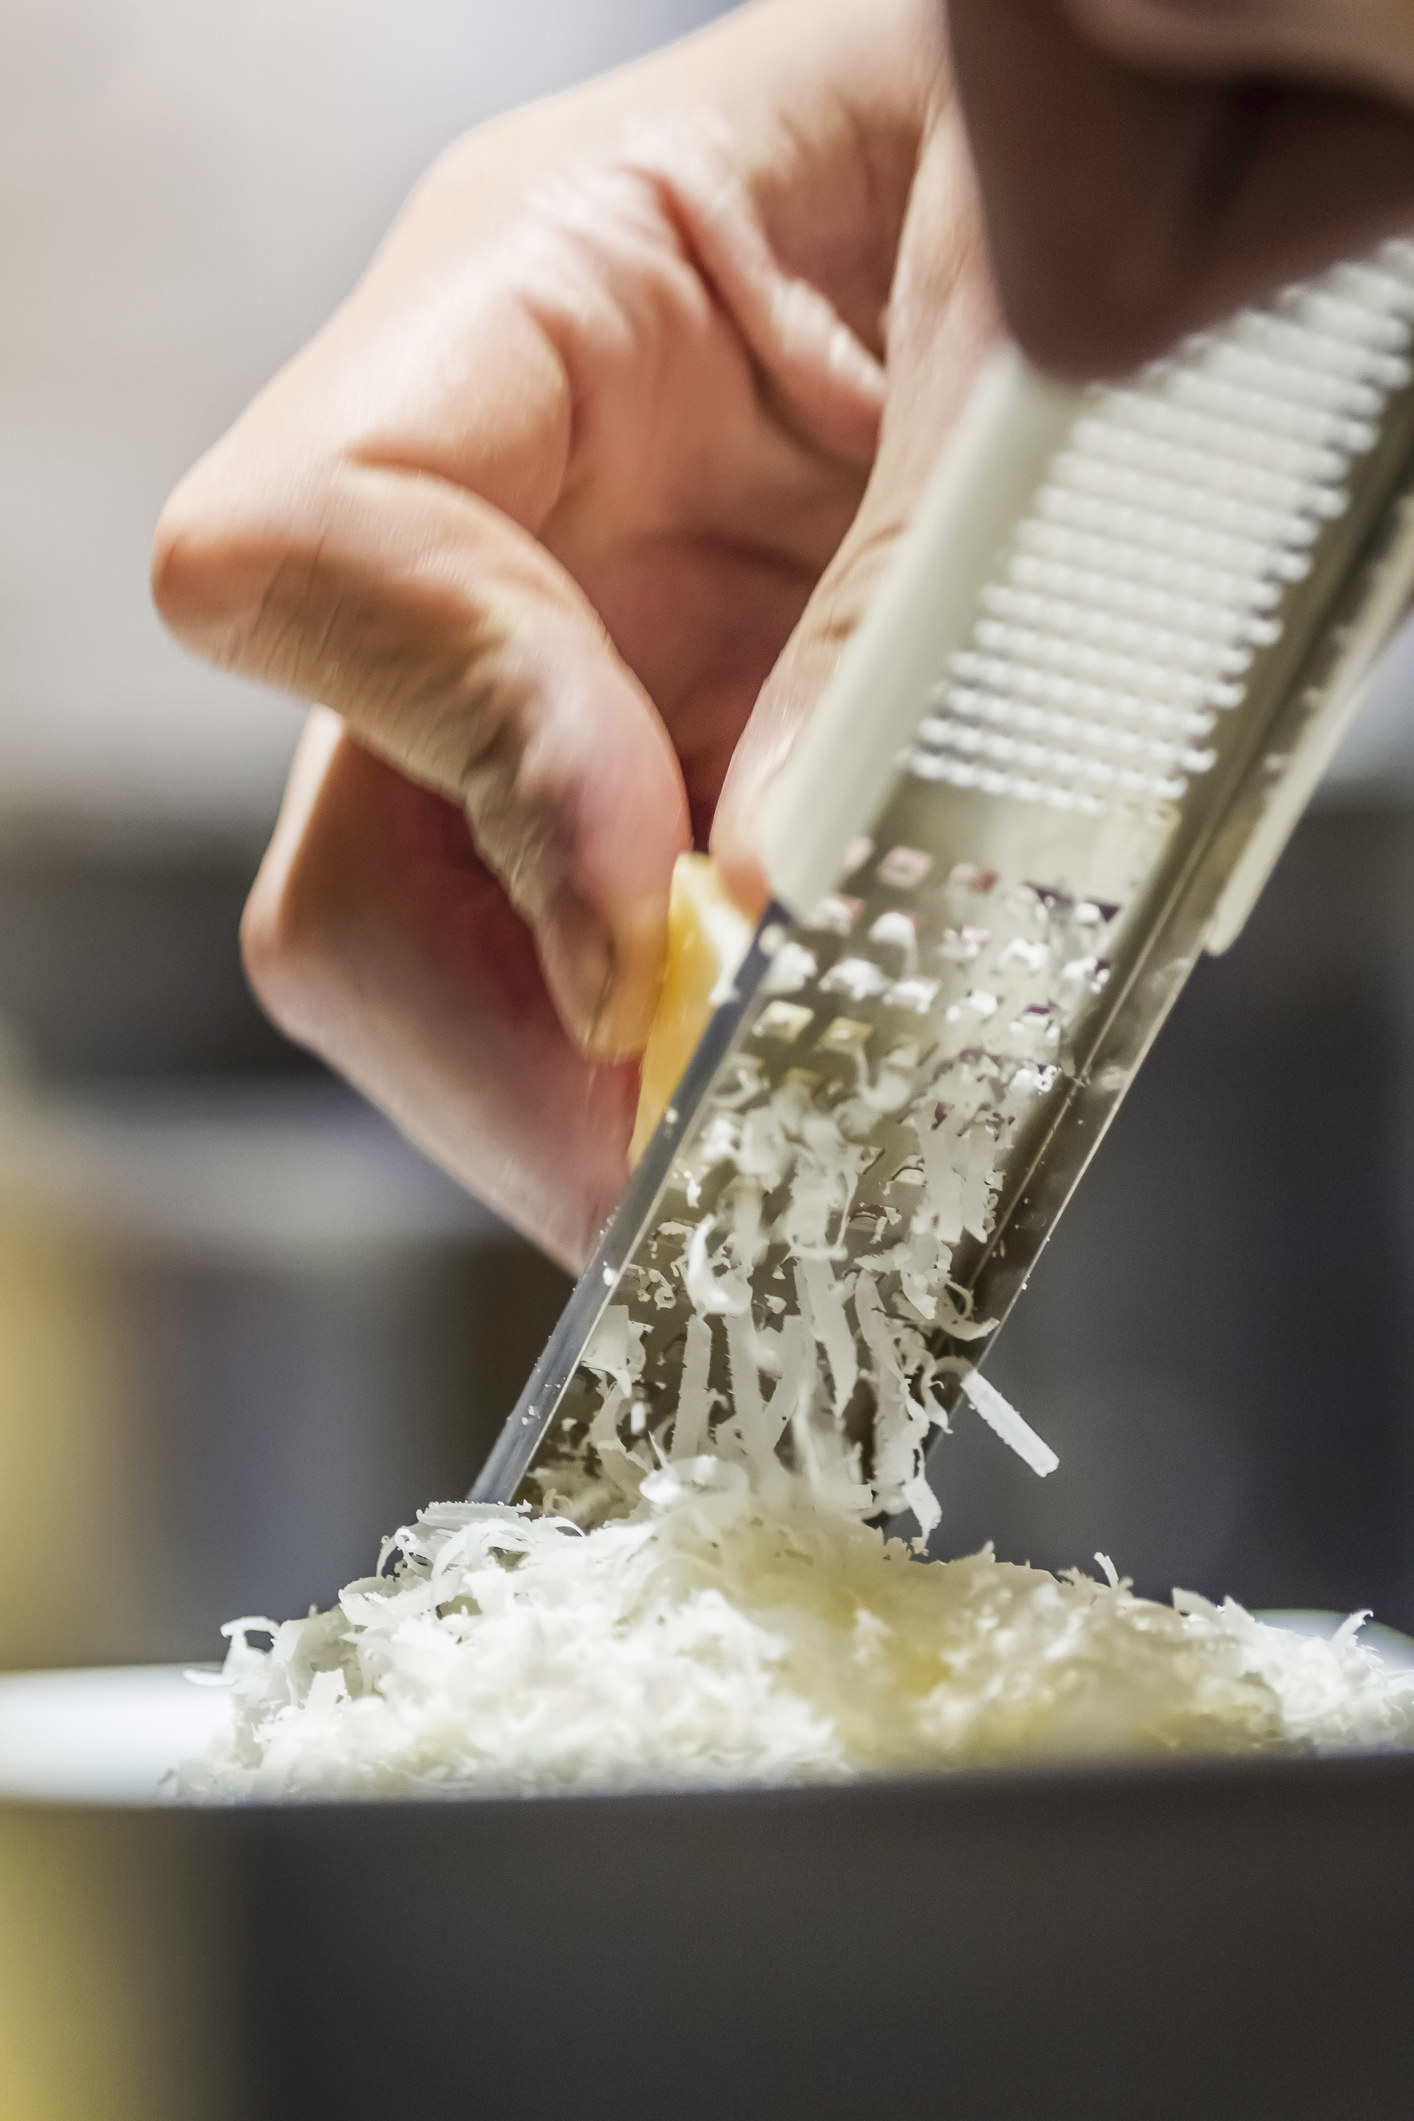 Close up of male hand grating parmesan cheese.